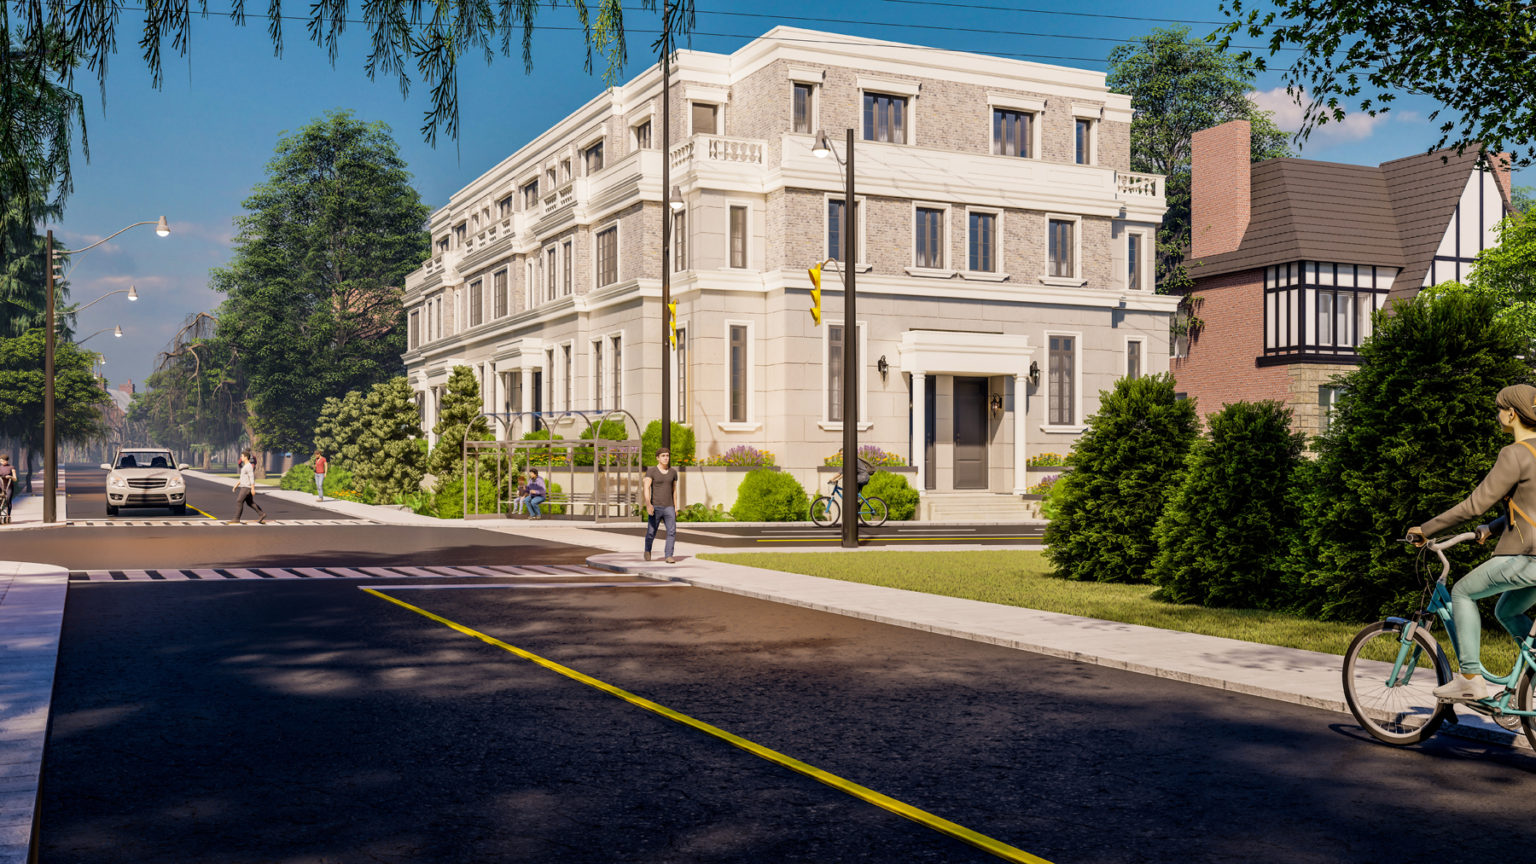 Rendering of Hillhurst Towns exterior in the summer.